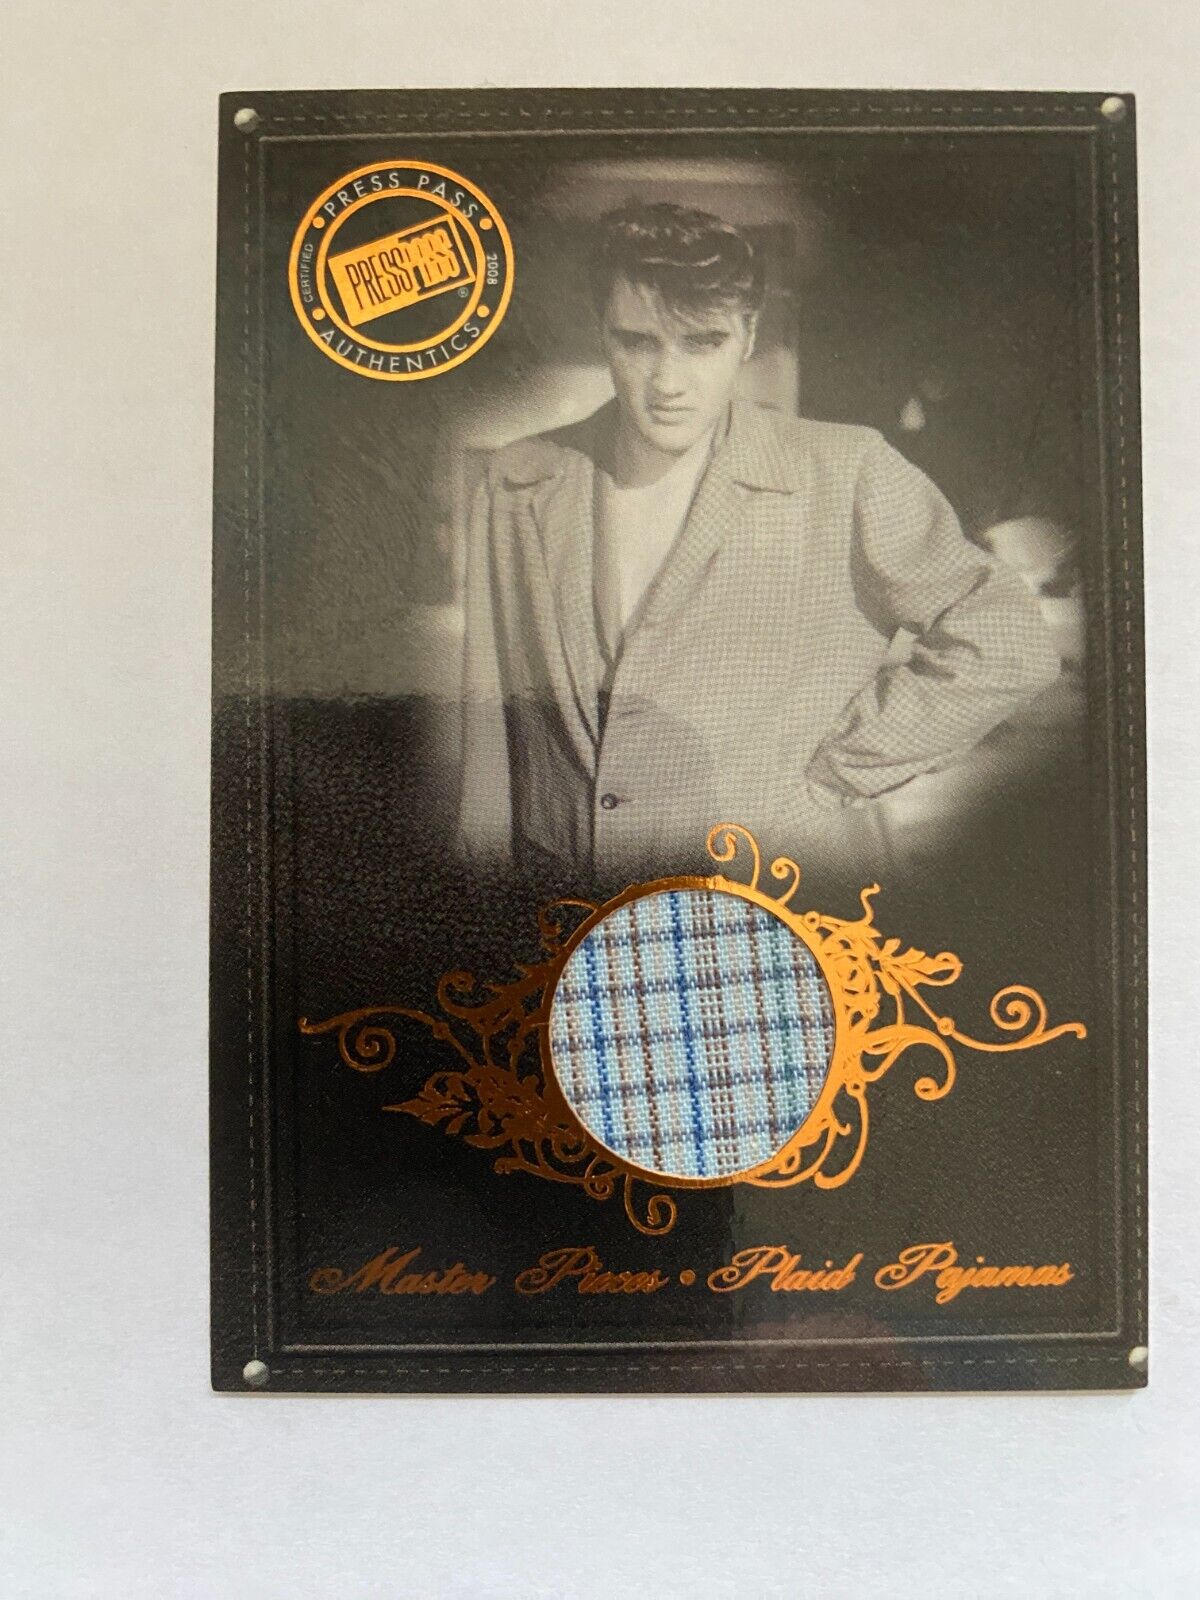 (2) 2008 Press Pass By The Numbers Elvis Presley Memorabilia Cards